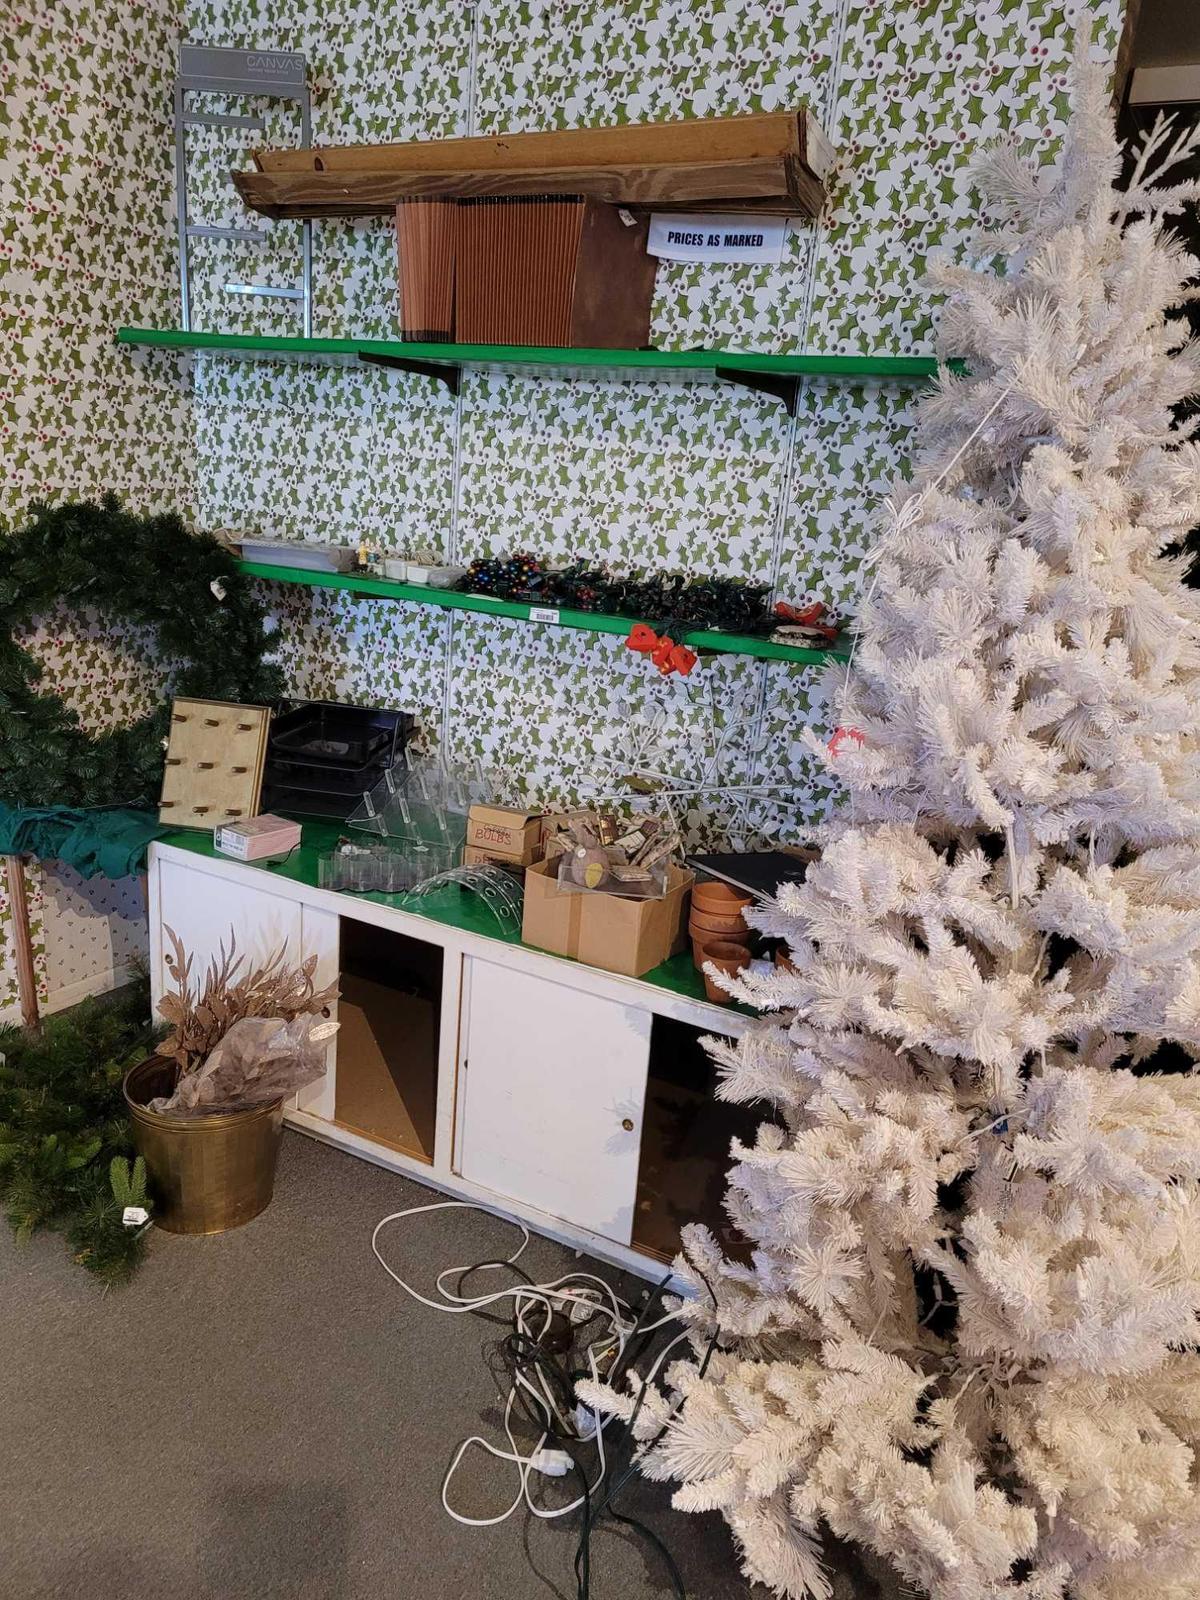 Shelving cabinet White tree Wreaths w lights. Strings of lights and single bulbs all included